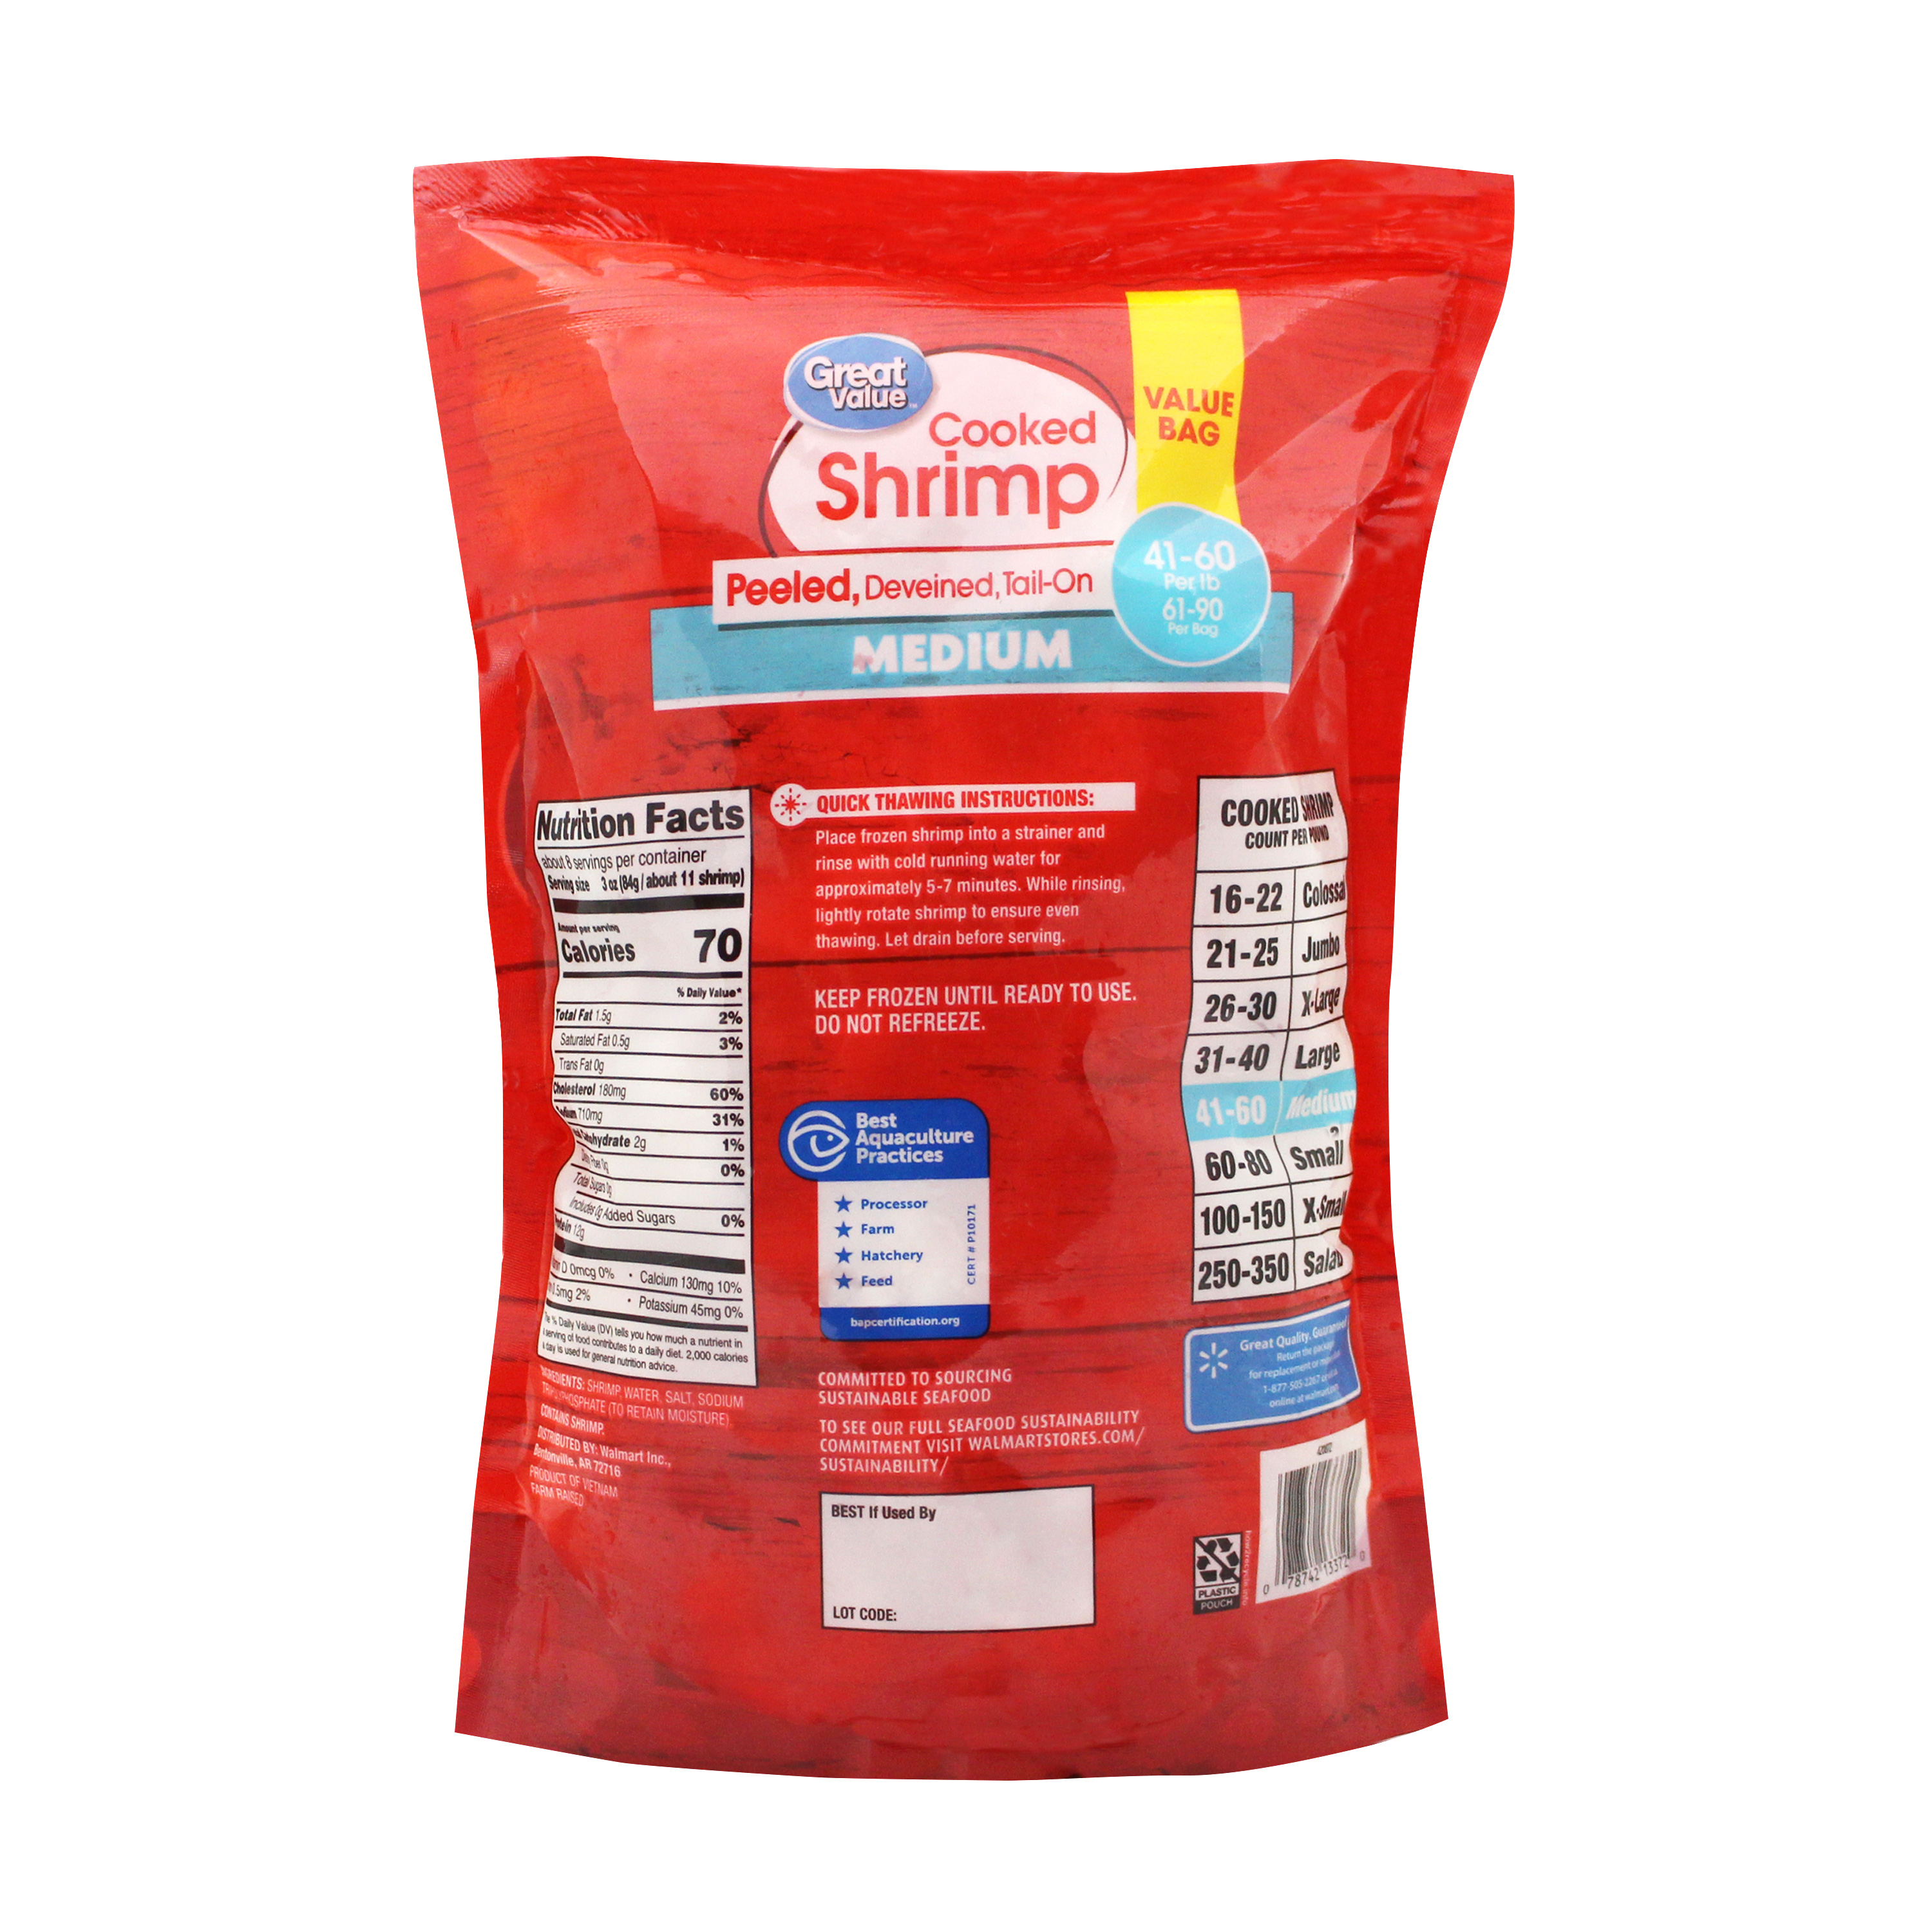 Great Value Frozen Cooked Medium Peeled Deveined Tail-On Shrimp, 24 oz Bag (41-60 count per lb) - image 8 of 10